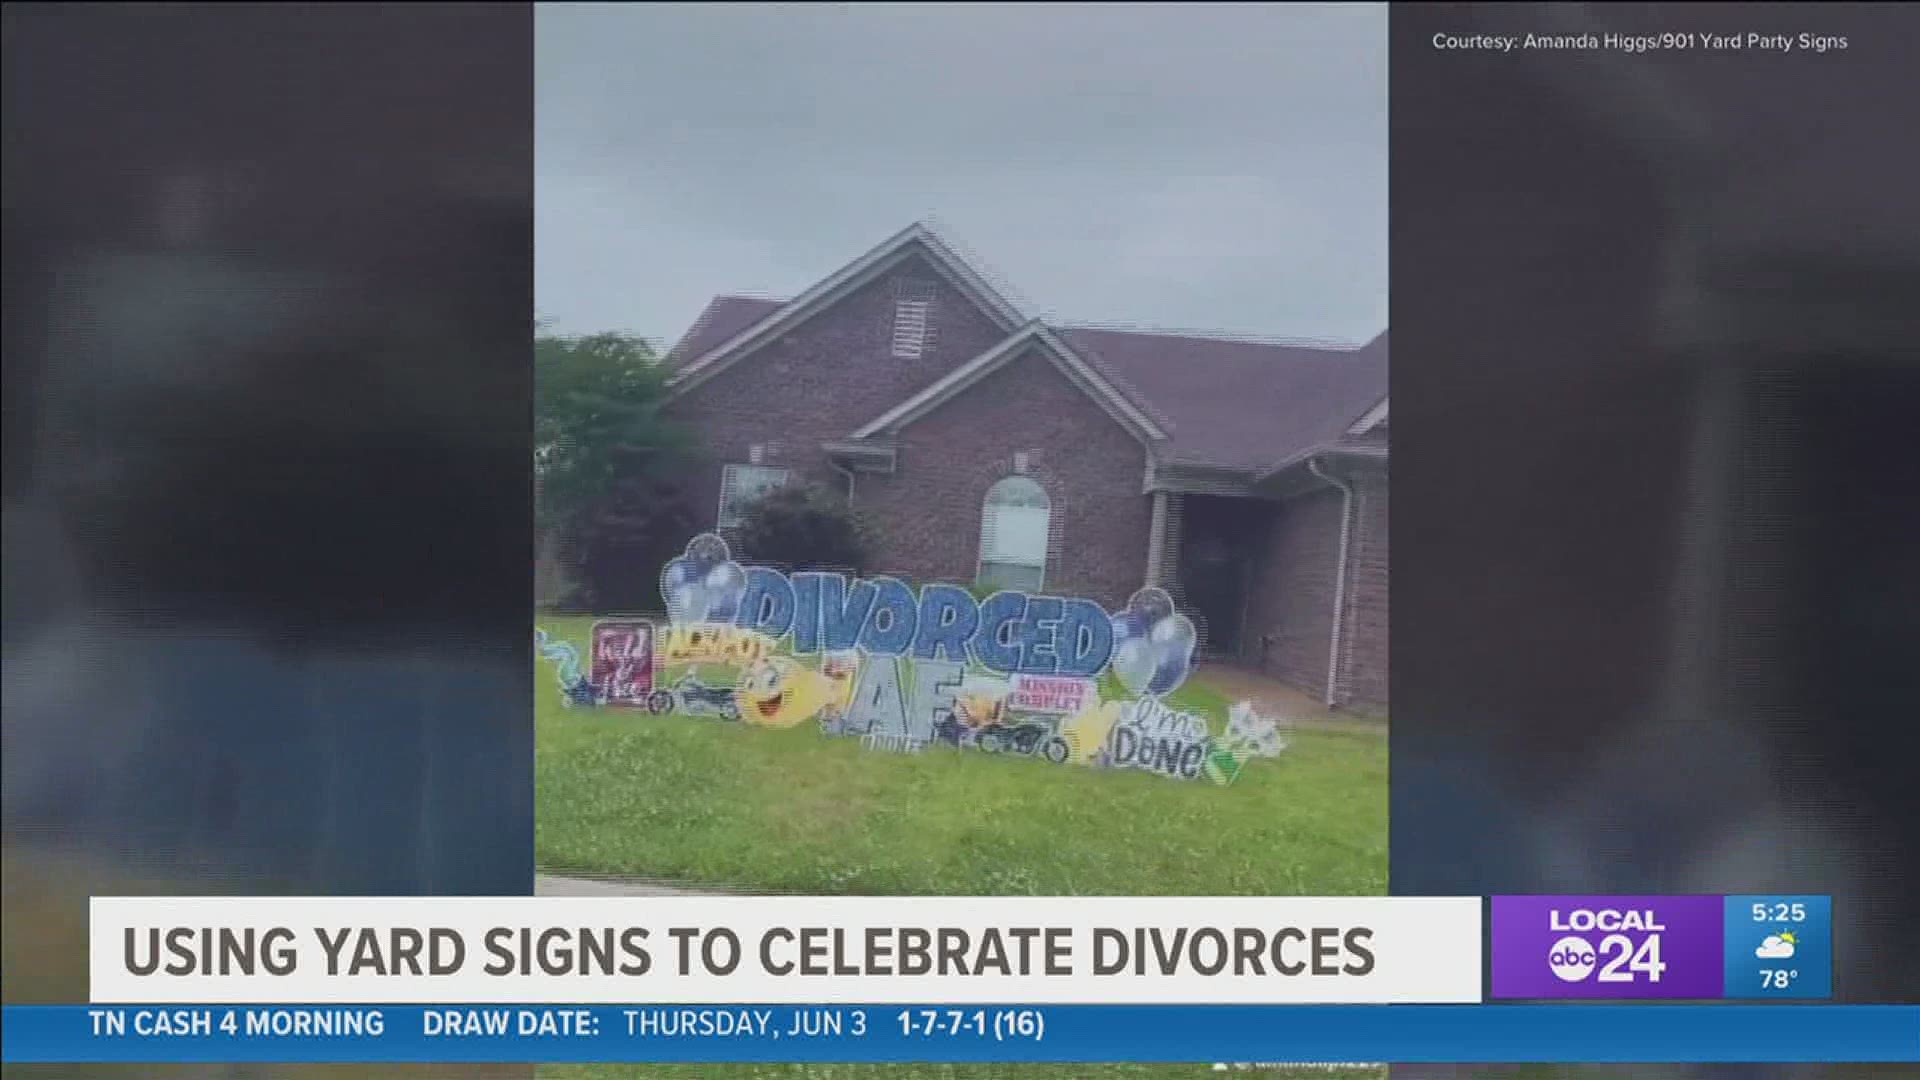 Yard sign decorations became popular during the pandemic but two celebrations took it to another level